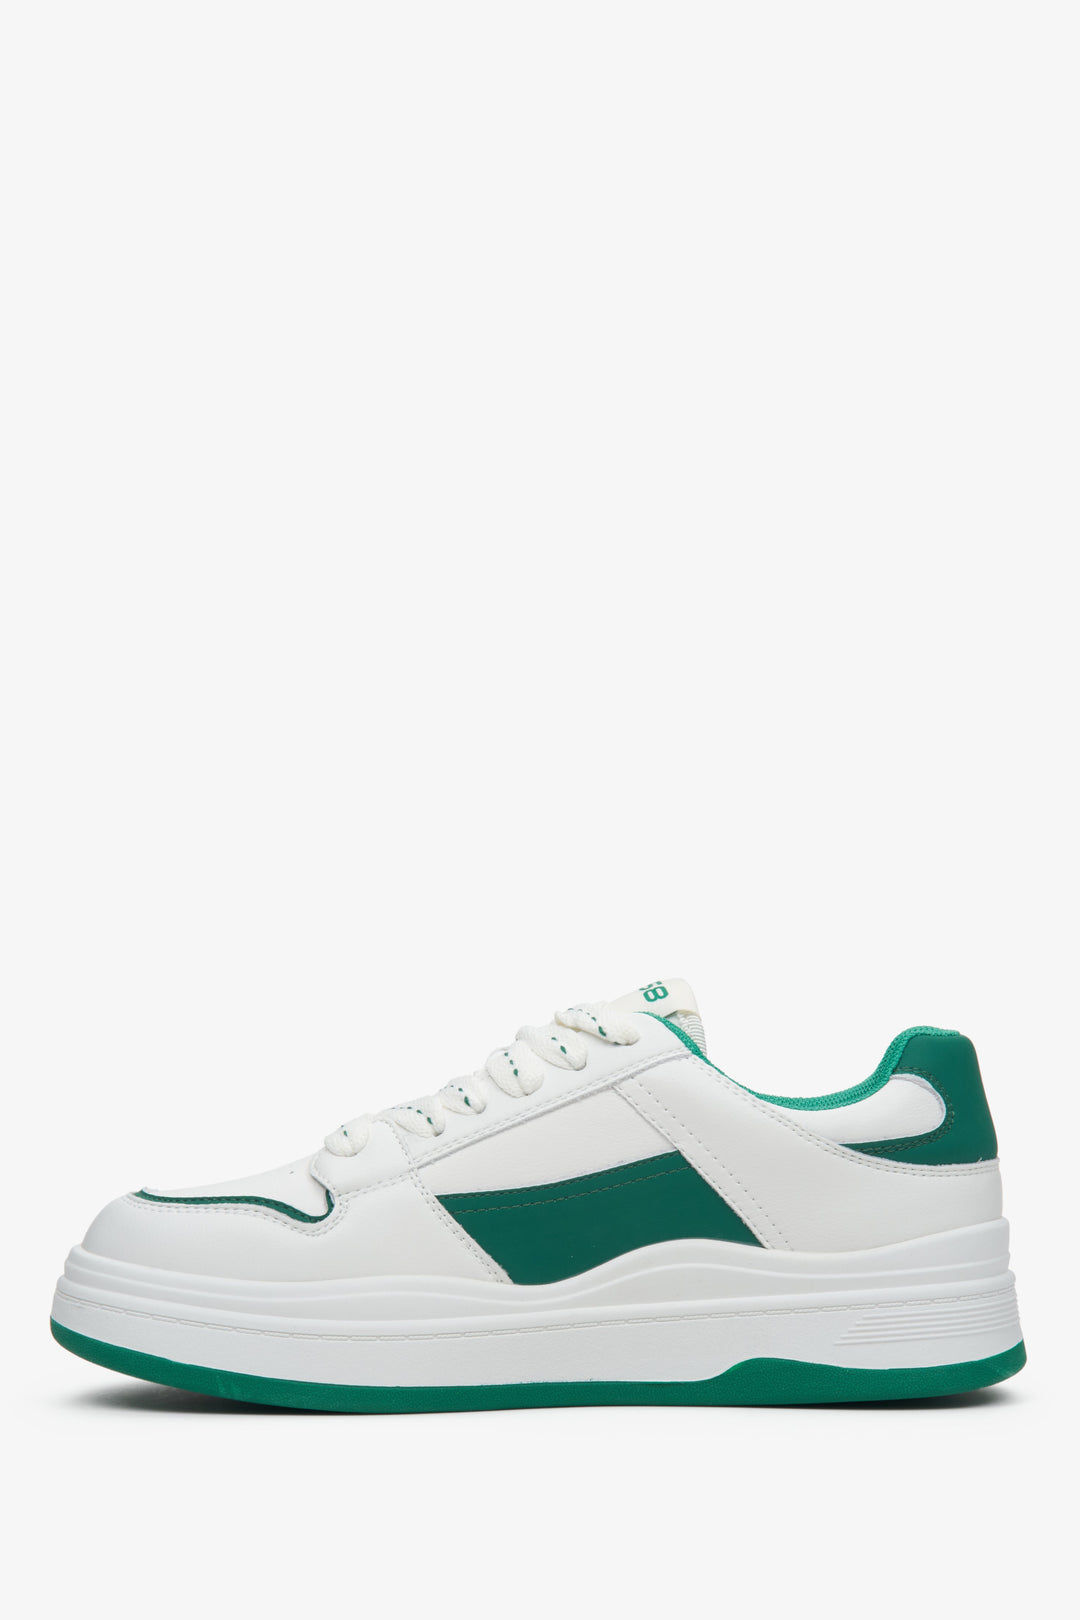 Women's white and green leather sneakers ES8 - presentation of a shoe toe and sideline.